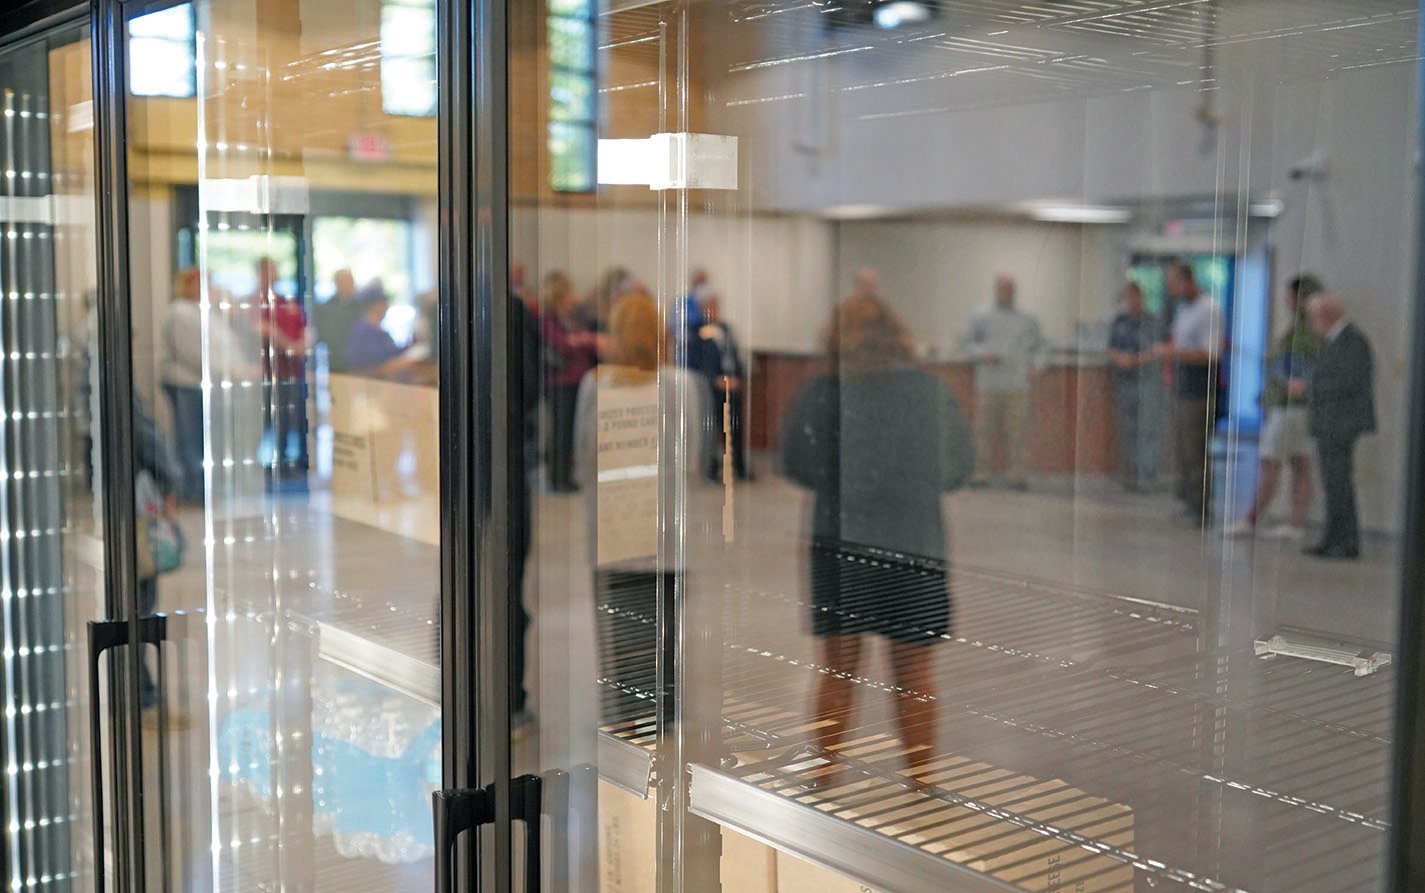 Images of people attending an open house at the new Catholic Charities center are reflected in the glass doors to the refrigerators for the client-choice food pantry that is slated to open in the building later this year. The food pantry occupies part of what was originally a gym for the former LaSalette Seminary.